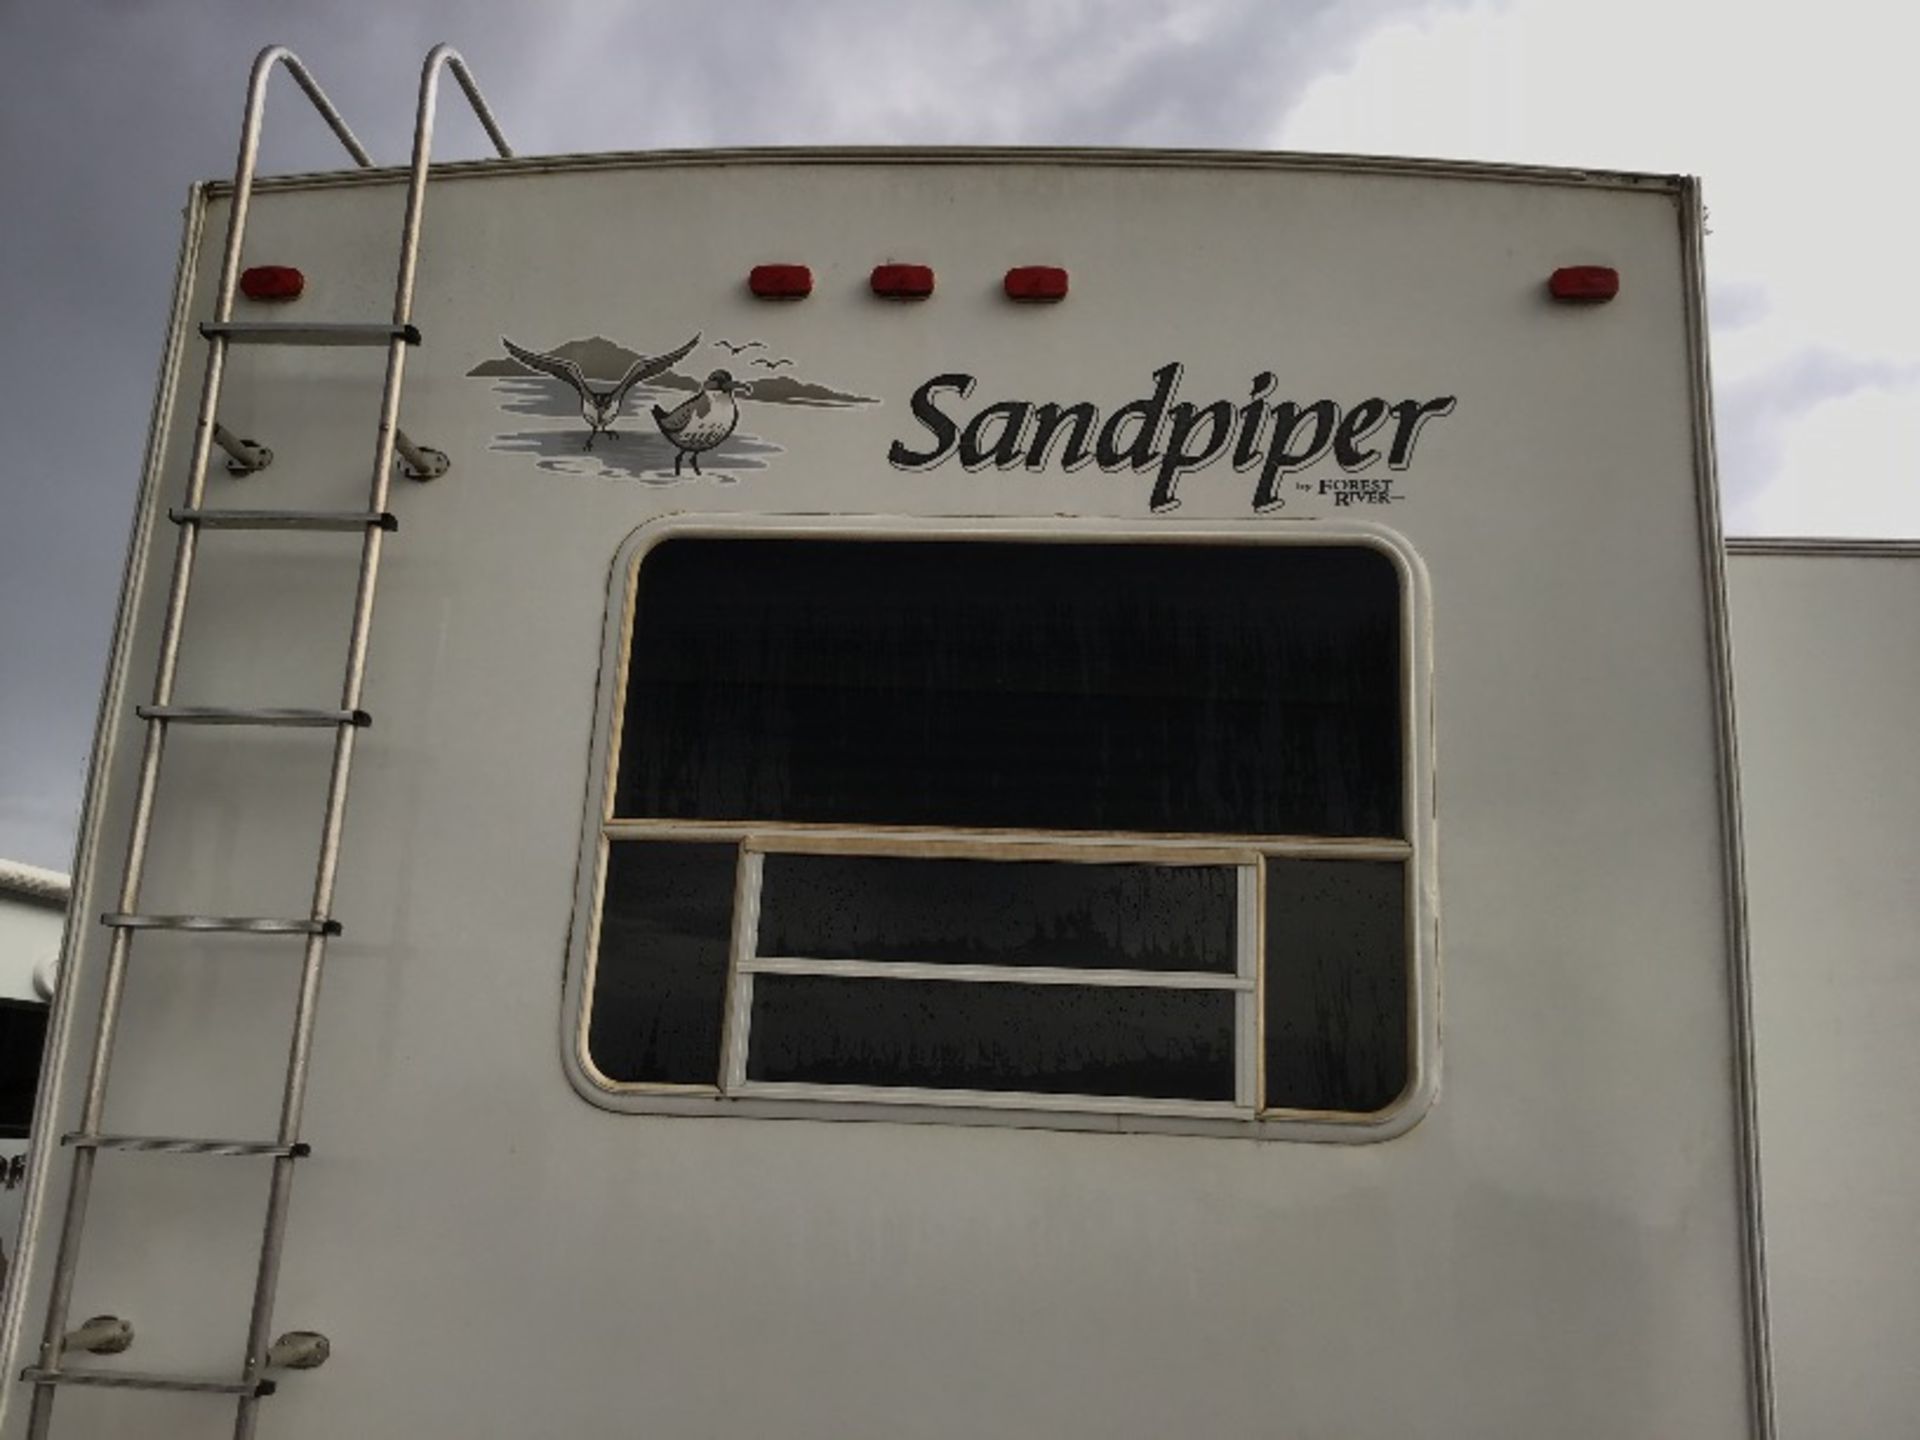 2007 Sandpiper F315 by Forest River 5th Wheel Holiday Trailer - Image 7 of 29